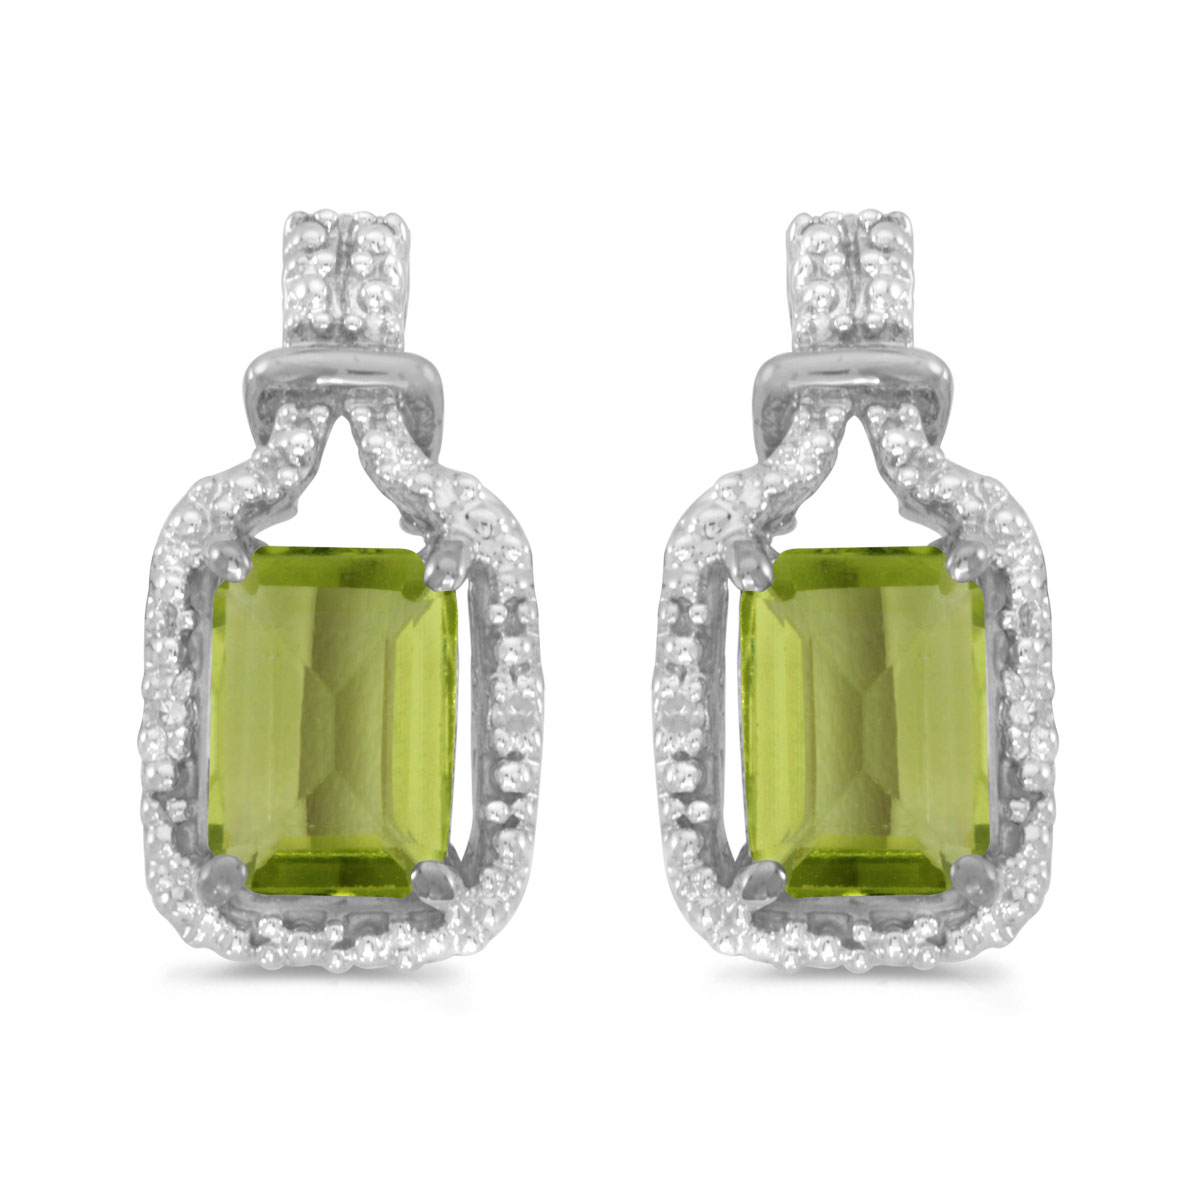 These 14k white gold emerald-cut peridot and diamond earrings feature 7x5 mm genuine natural peri...